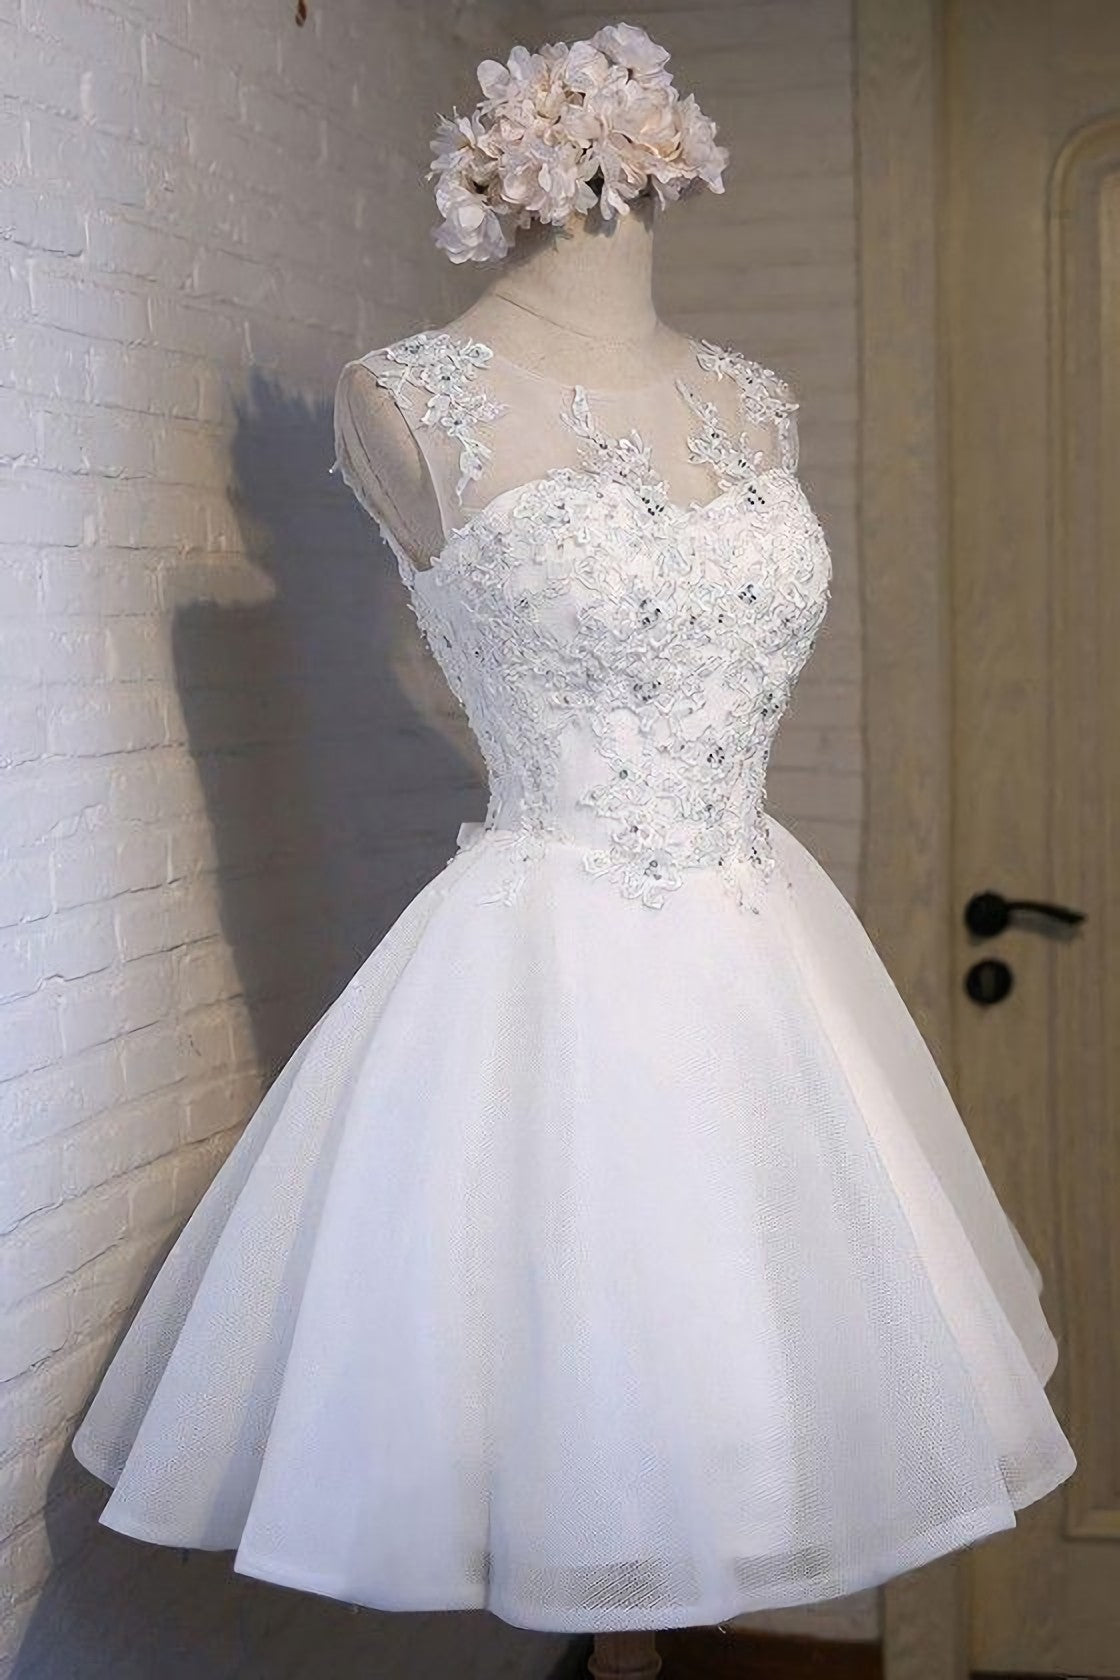 Prom Dresses Near Me, Glamorous A Line Scoop Neckline Short Homecoming Dresses, White Homecoming Dresses, With Sleeveless